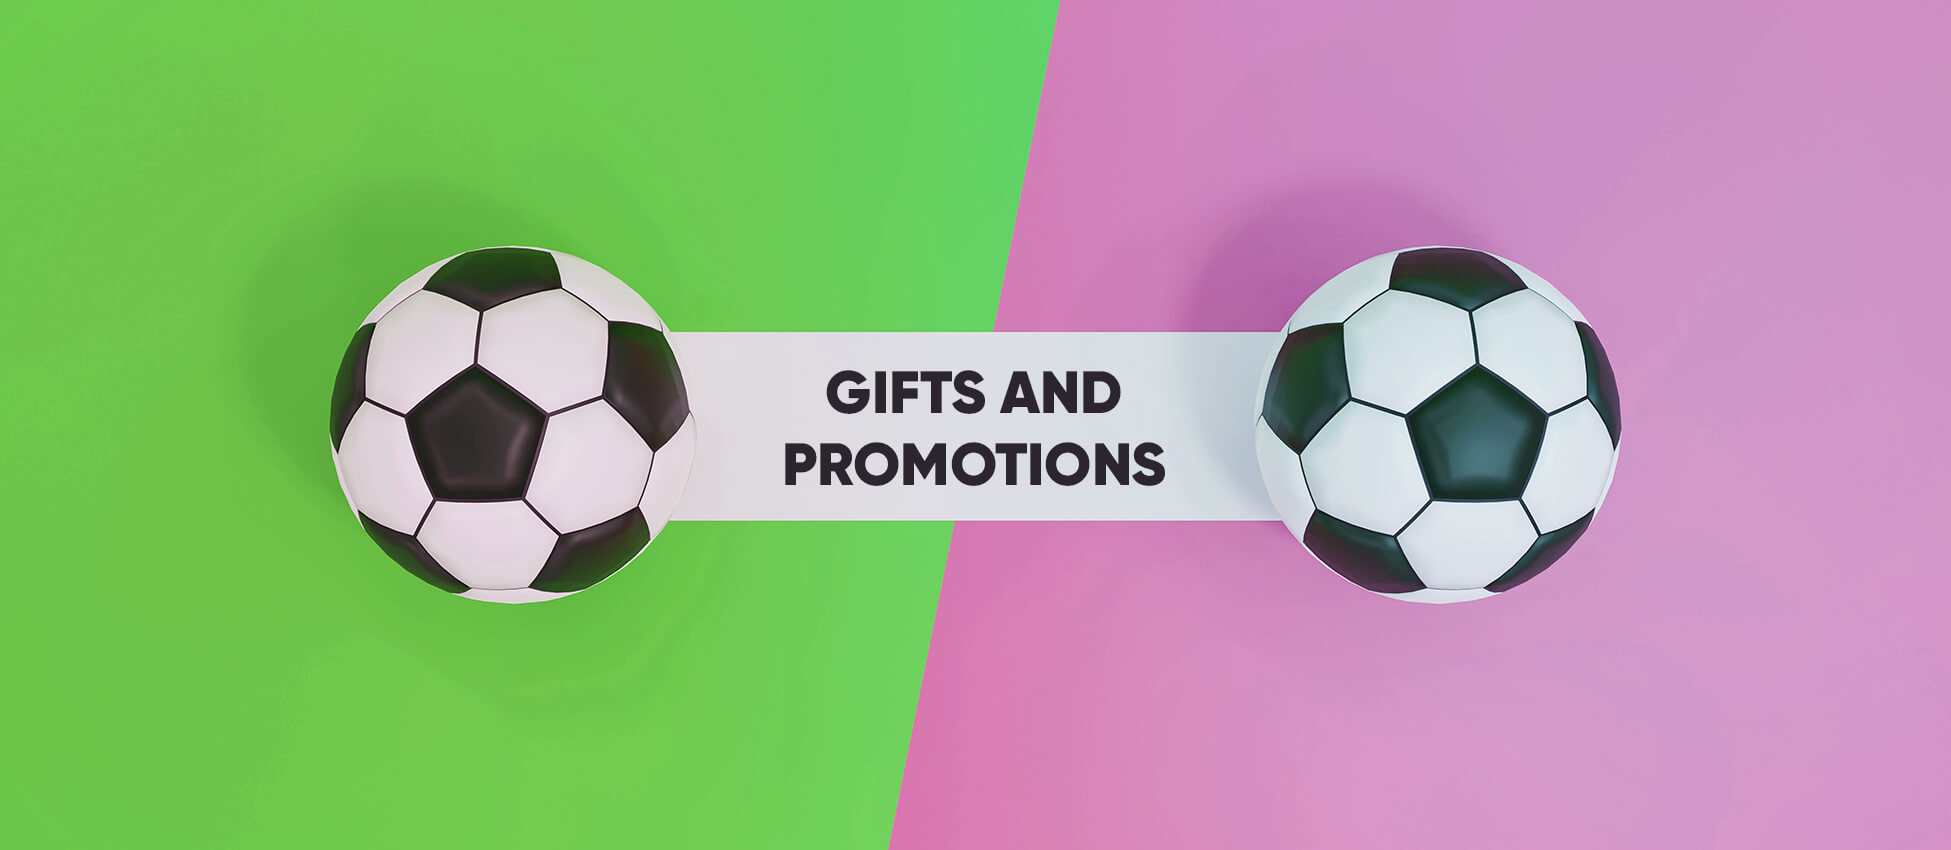 Gifts and promotions